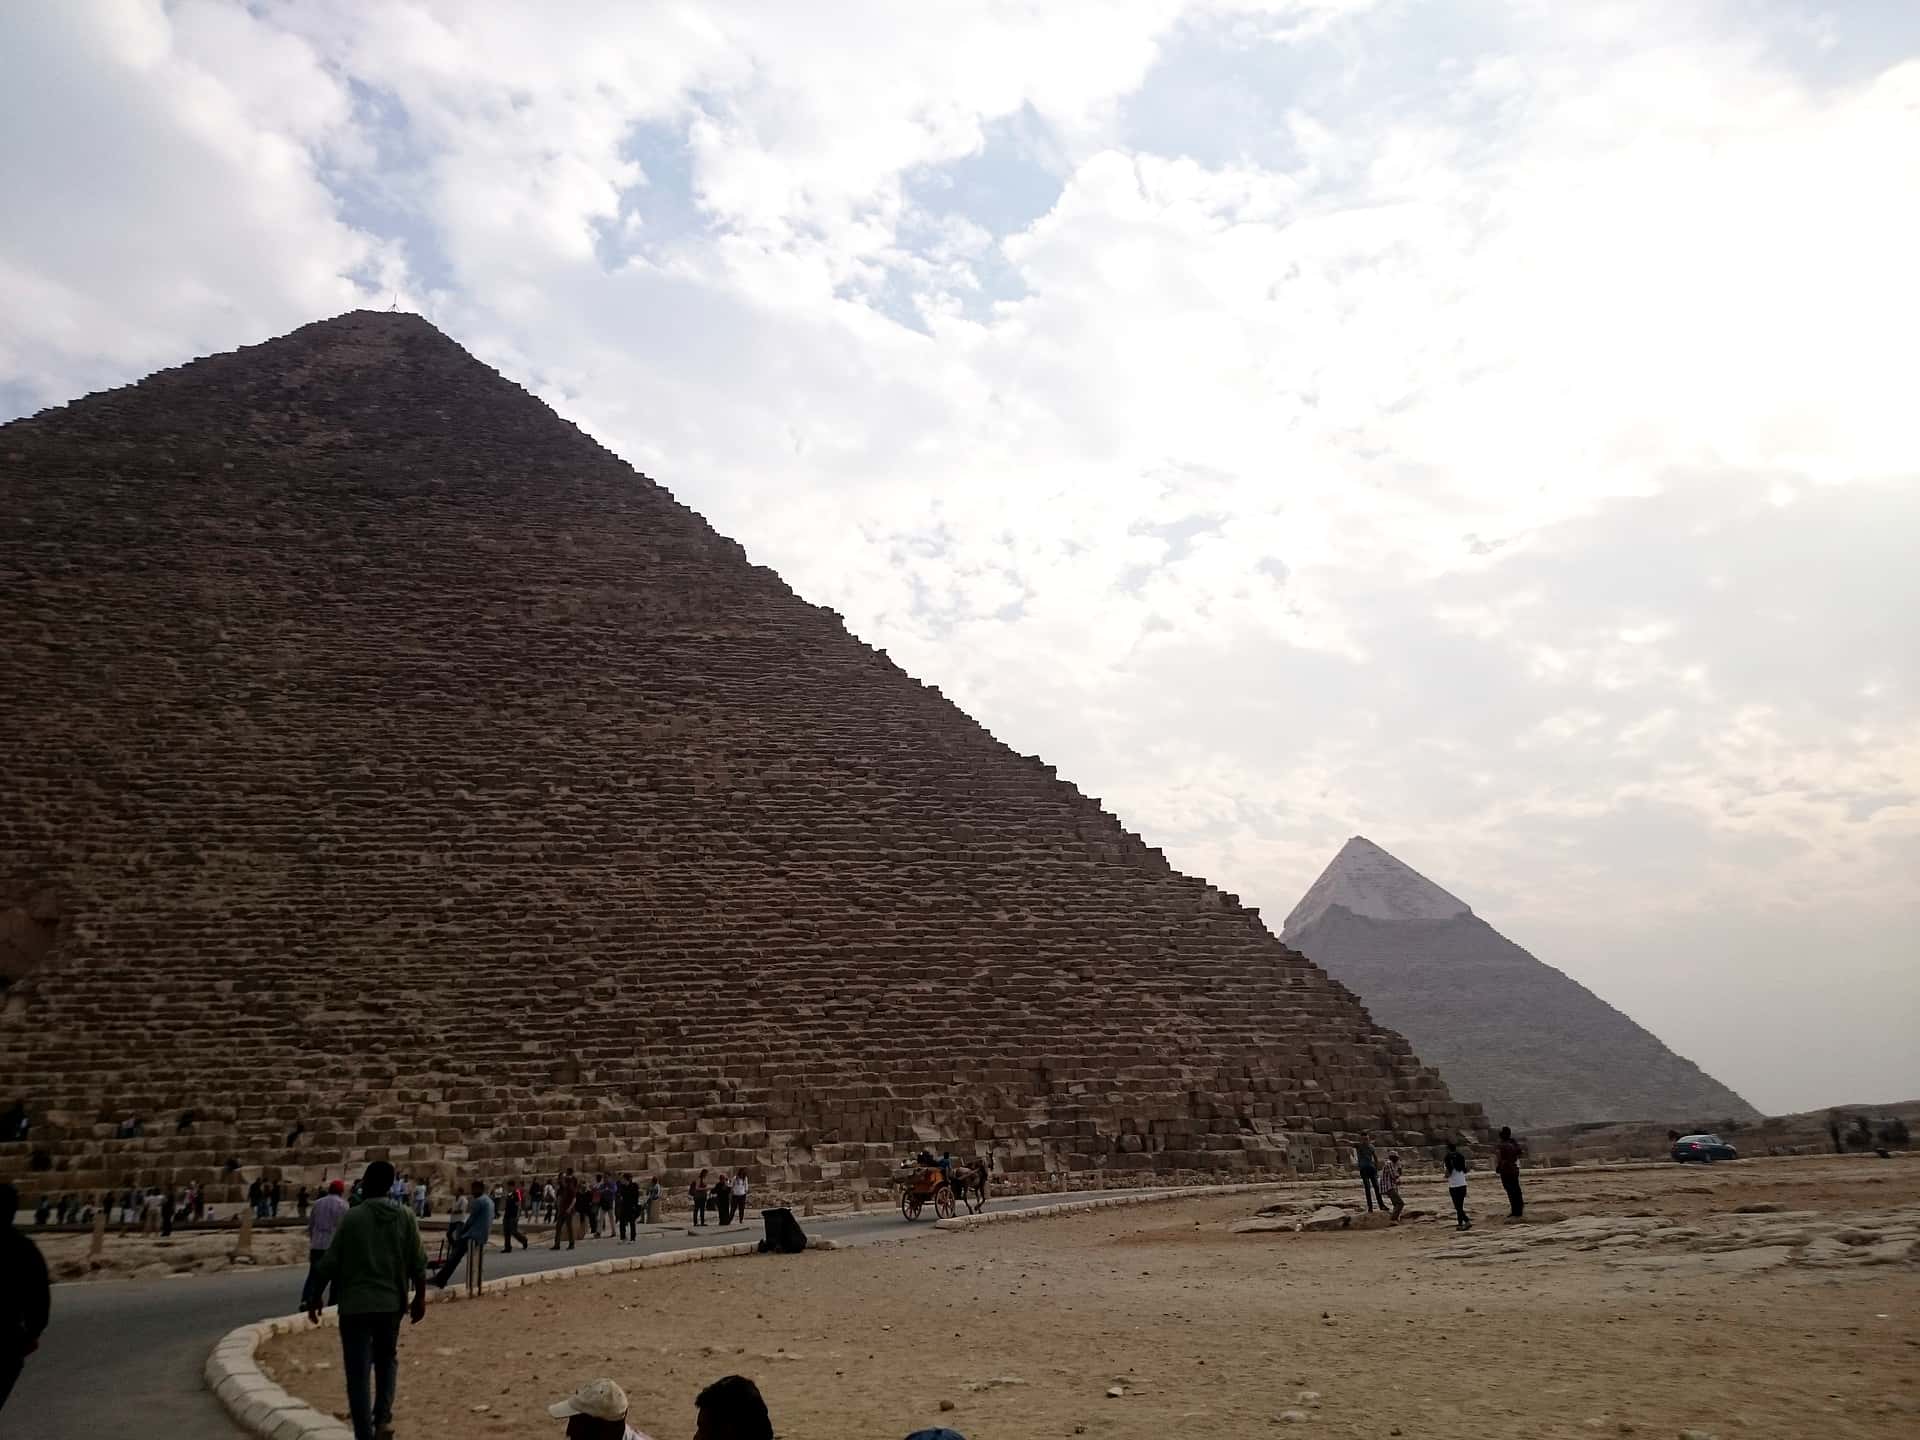 The Great Pyramids facts